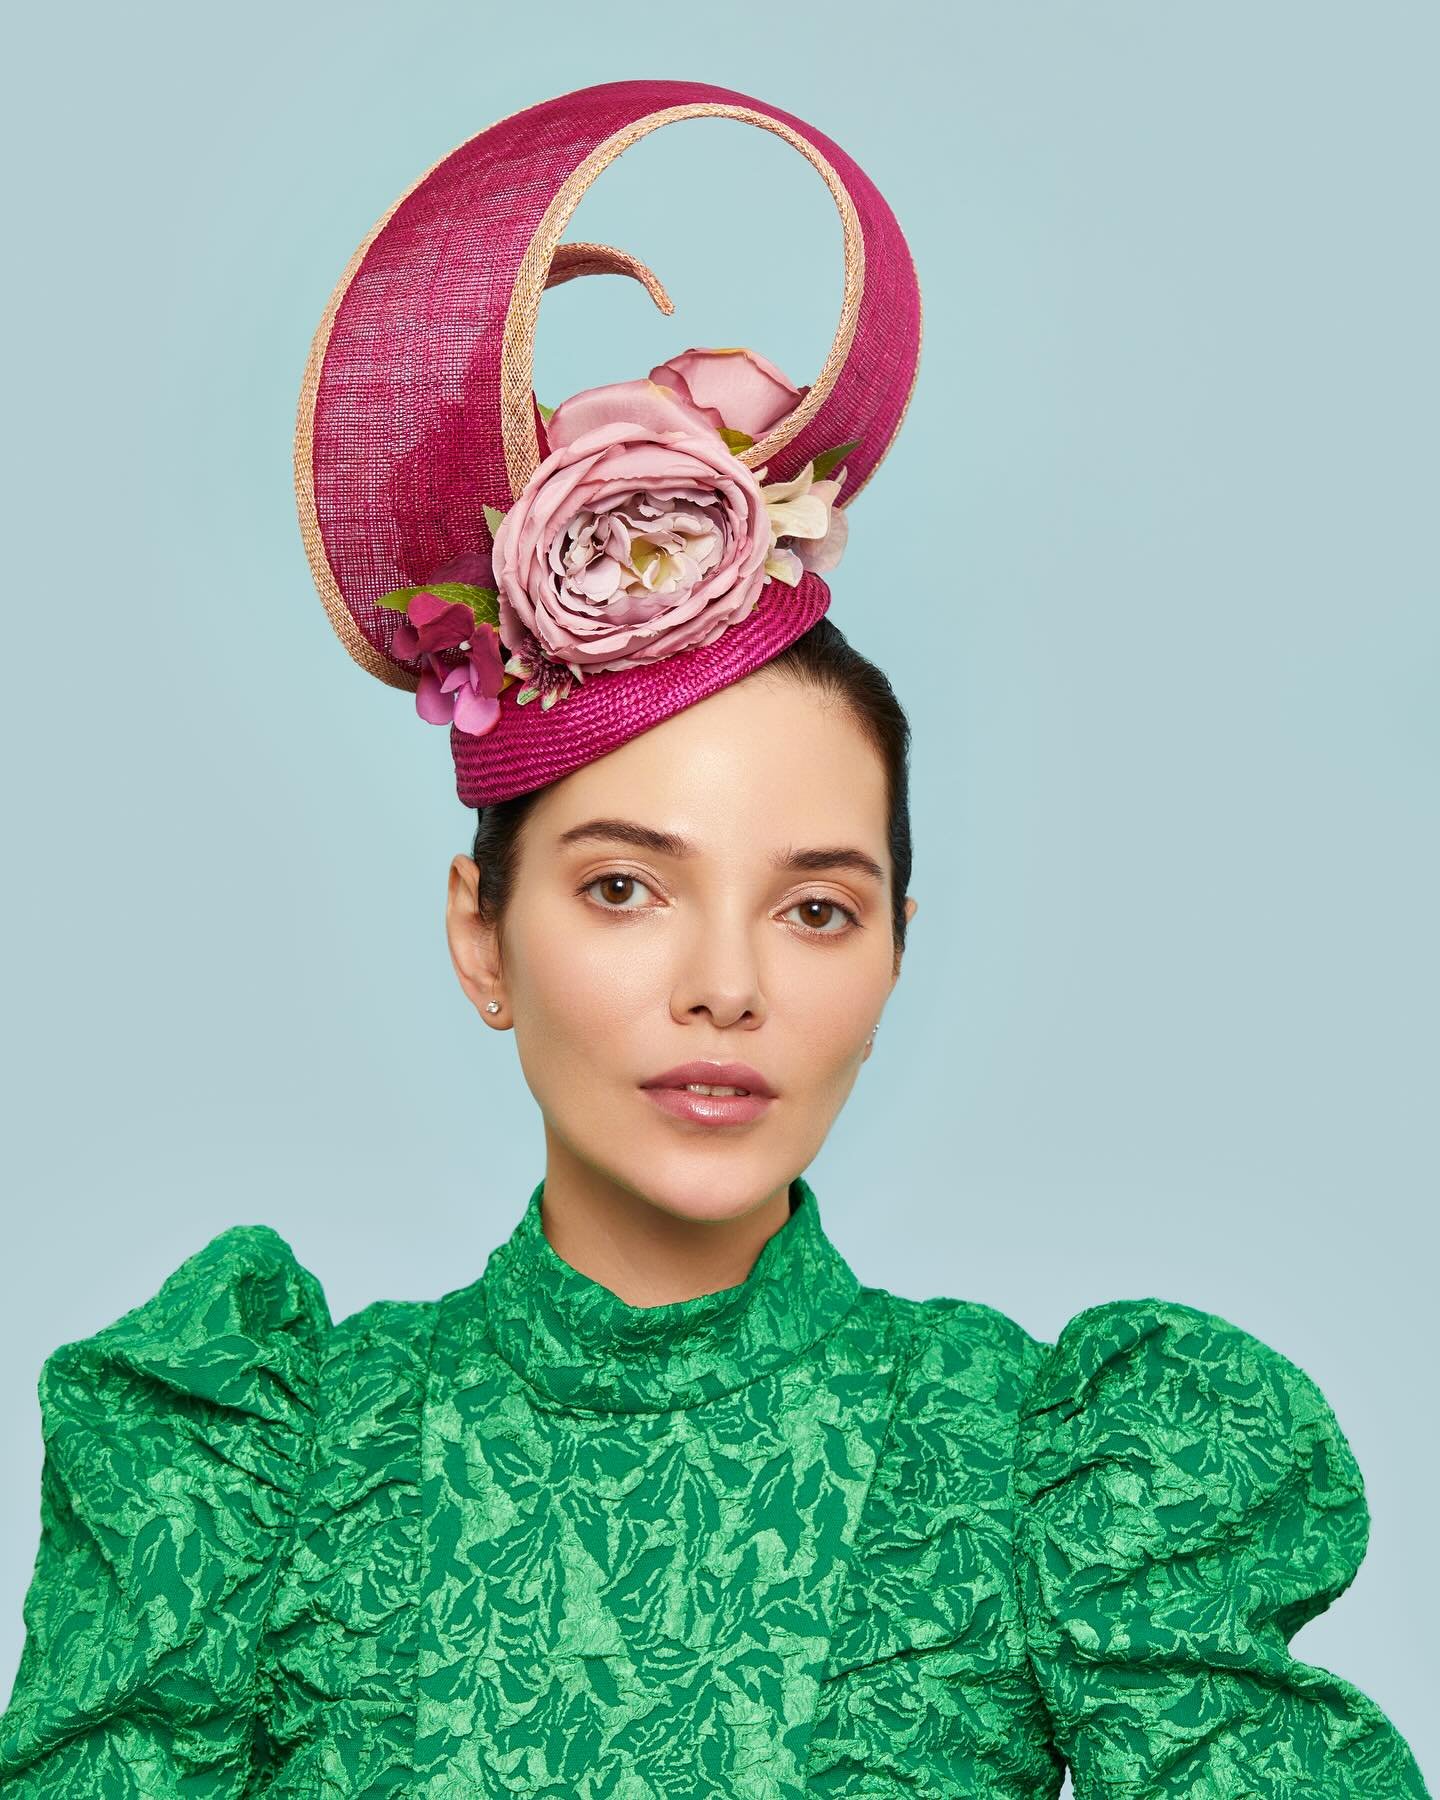 New Collection - Sculptural headpiece perfect for Royal Ascot, Epsom Derby, Goodwood or a summer wedding.
.
.

Made in sinamay straw with silk flowers.
.
.

Photographer@laurenmarshphotography
Makeup artist @anitastevensmua
Model @alena_
_ts_
.
.

#b